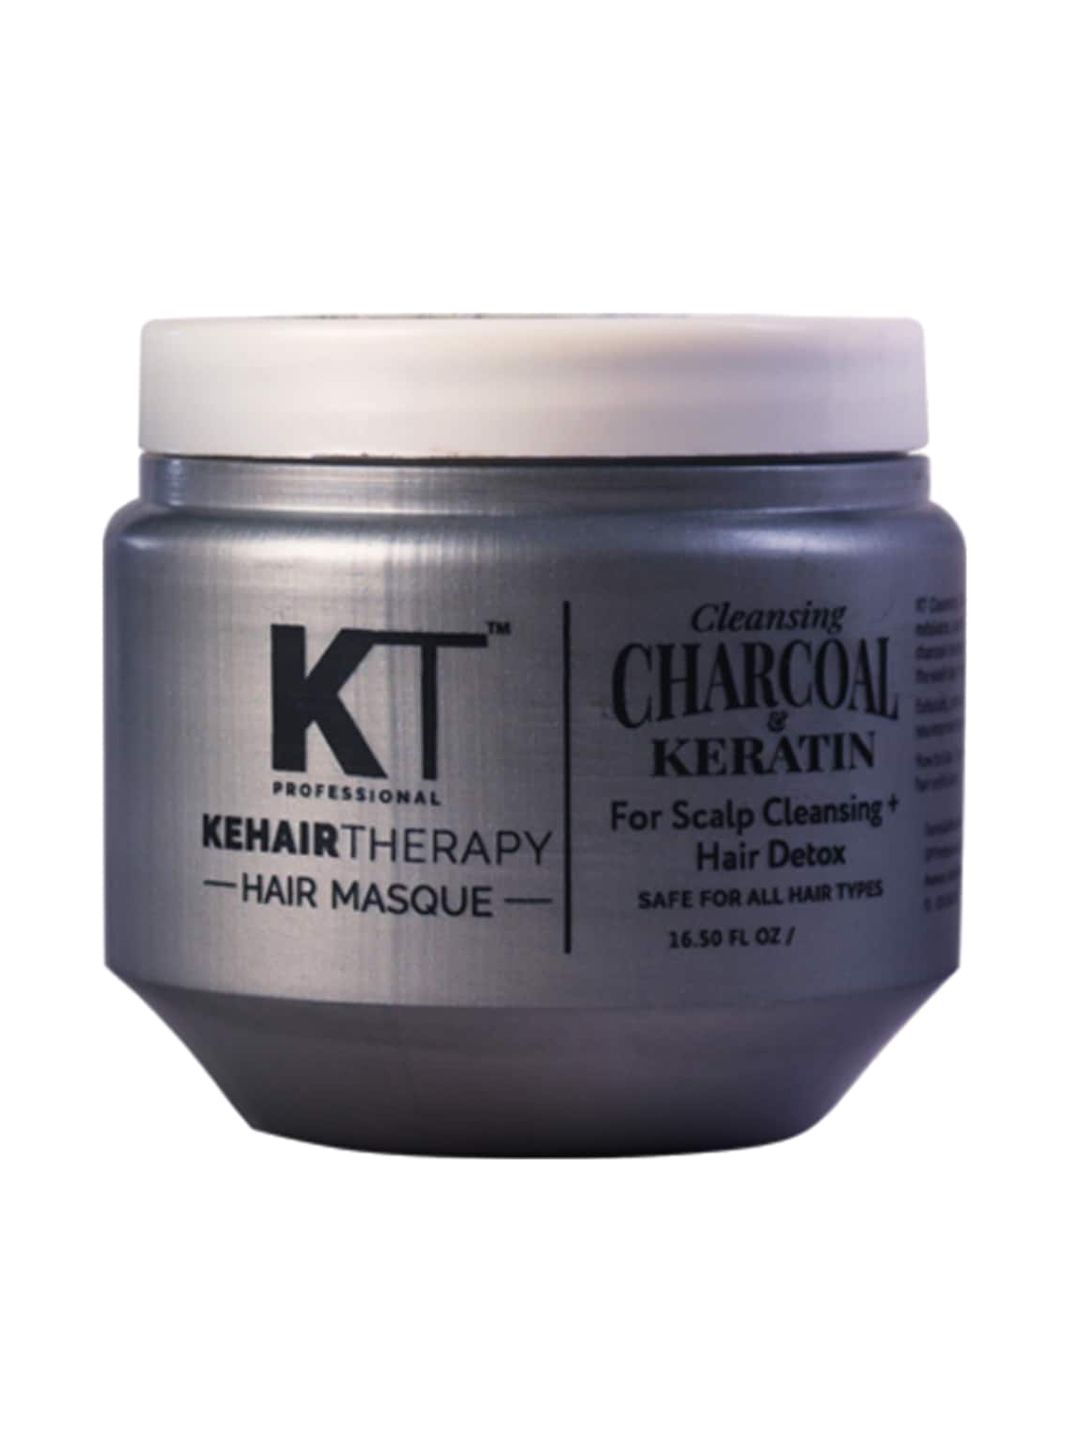 KEHAIRTHERAPY Cleansing Charcoal & Keratin Hair Detox Hair Masque - 250 ml Price in India